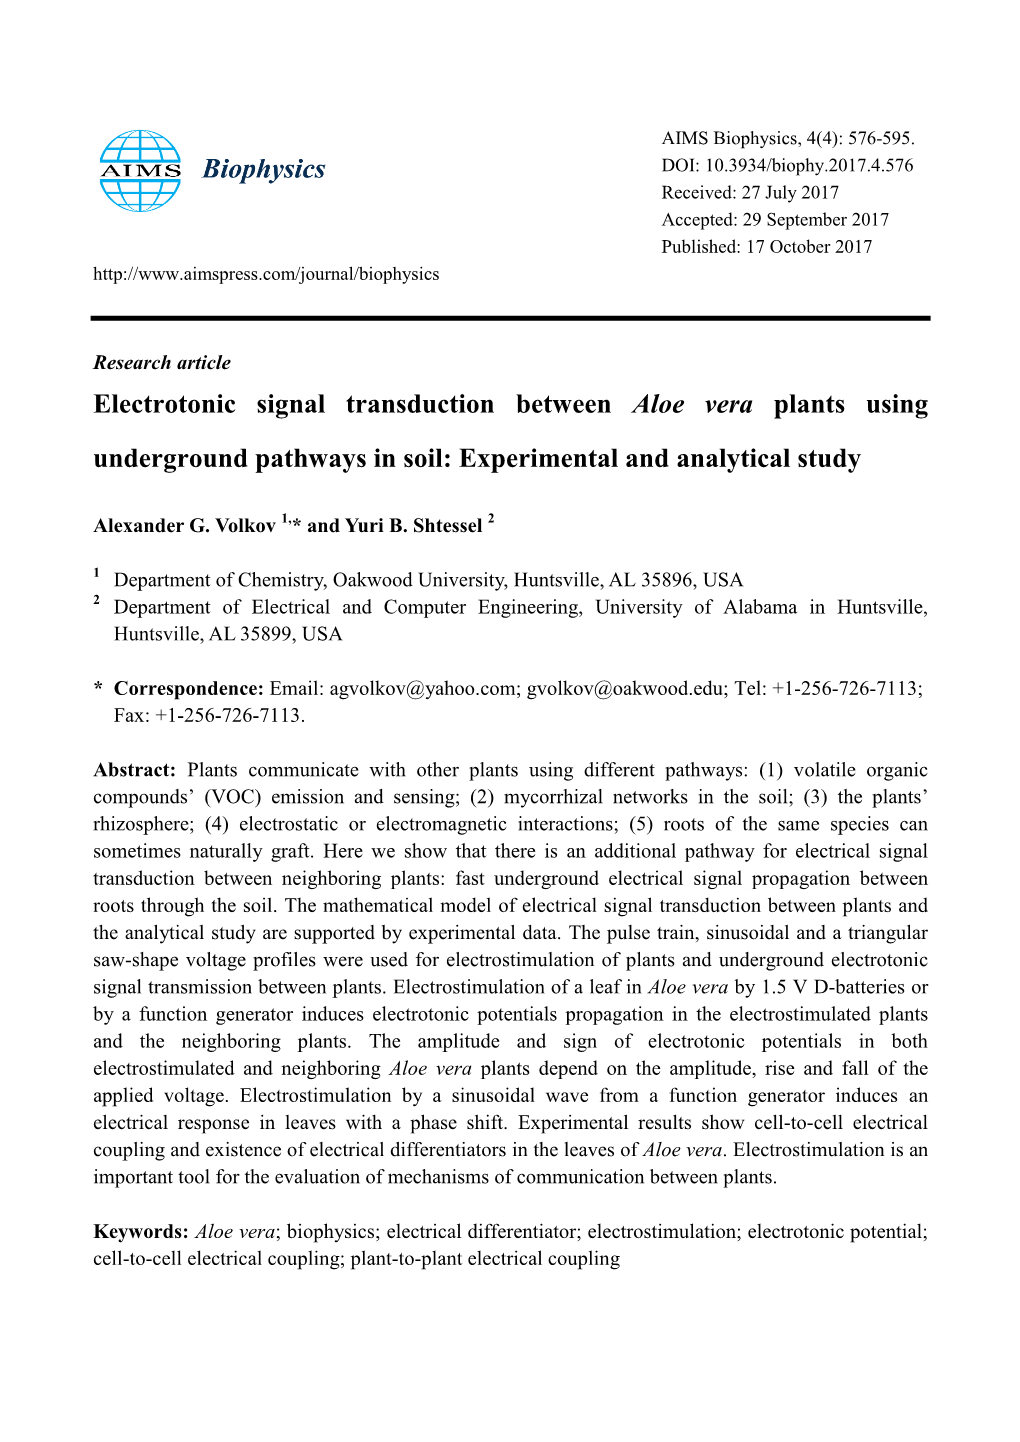 Electrotonic Signal Transduction Between Aloe Vera Plants Using Underground Pathways in Soil: Experimental and Analytical Study